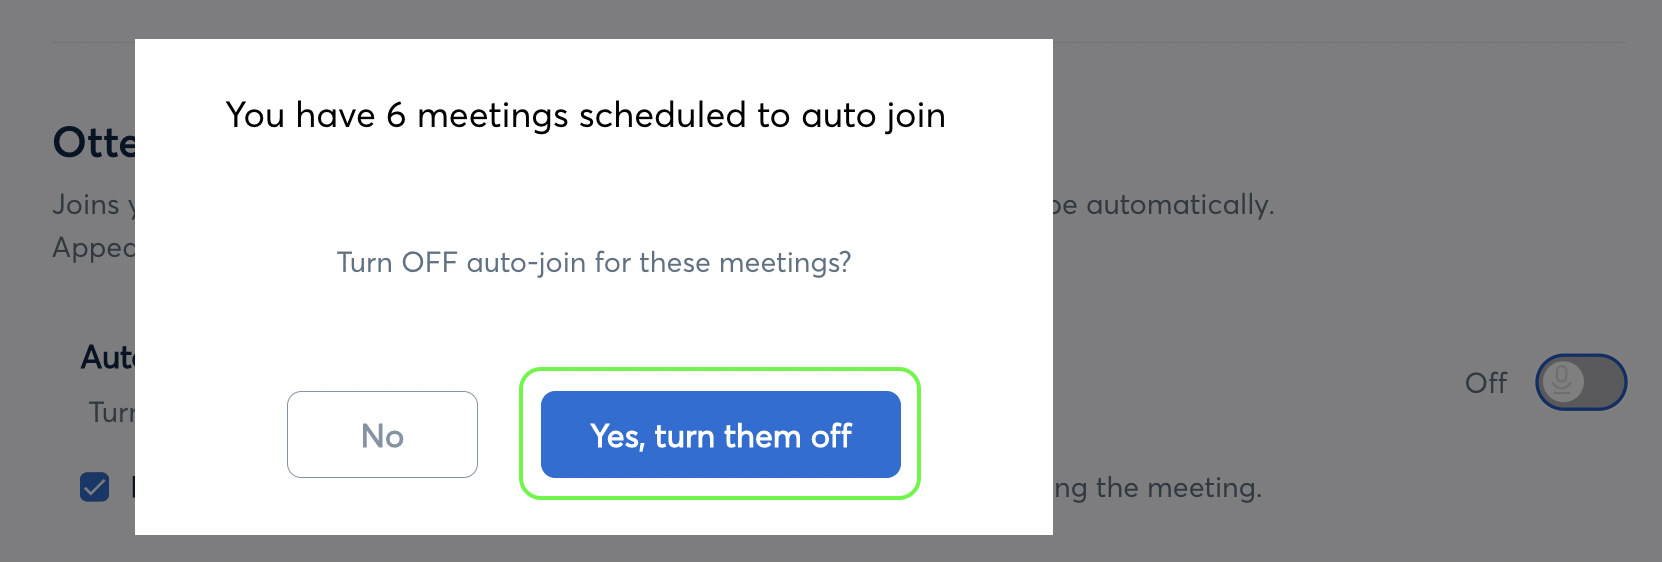 confirm_auto-join_toggle_off.png